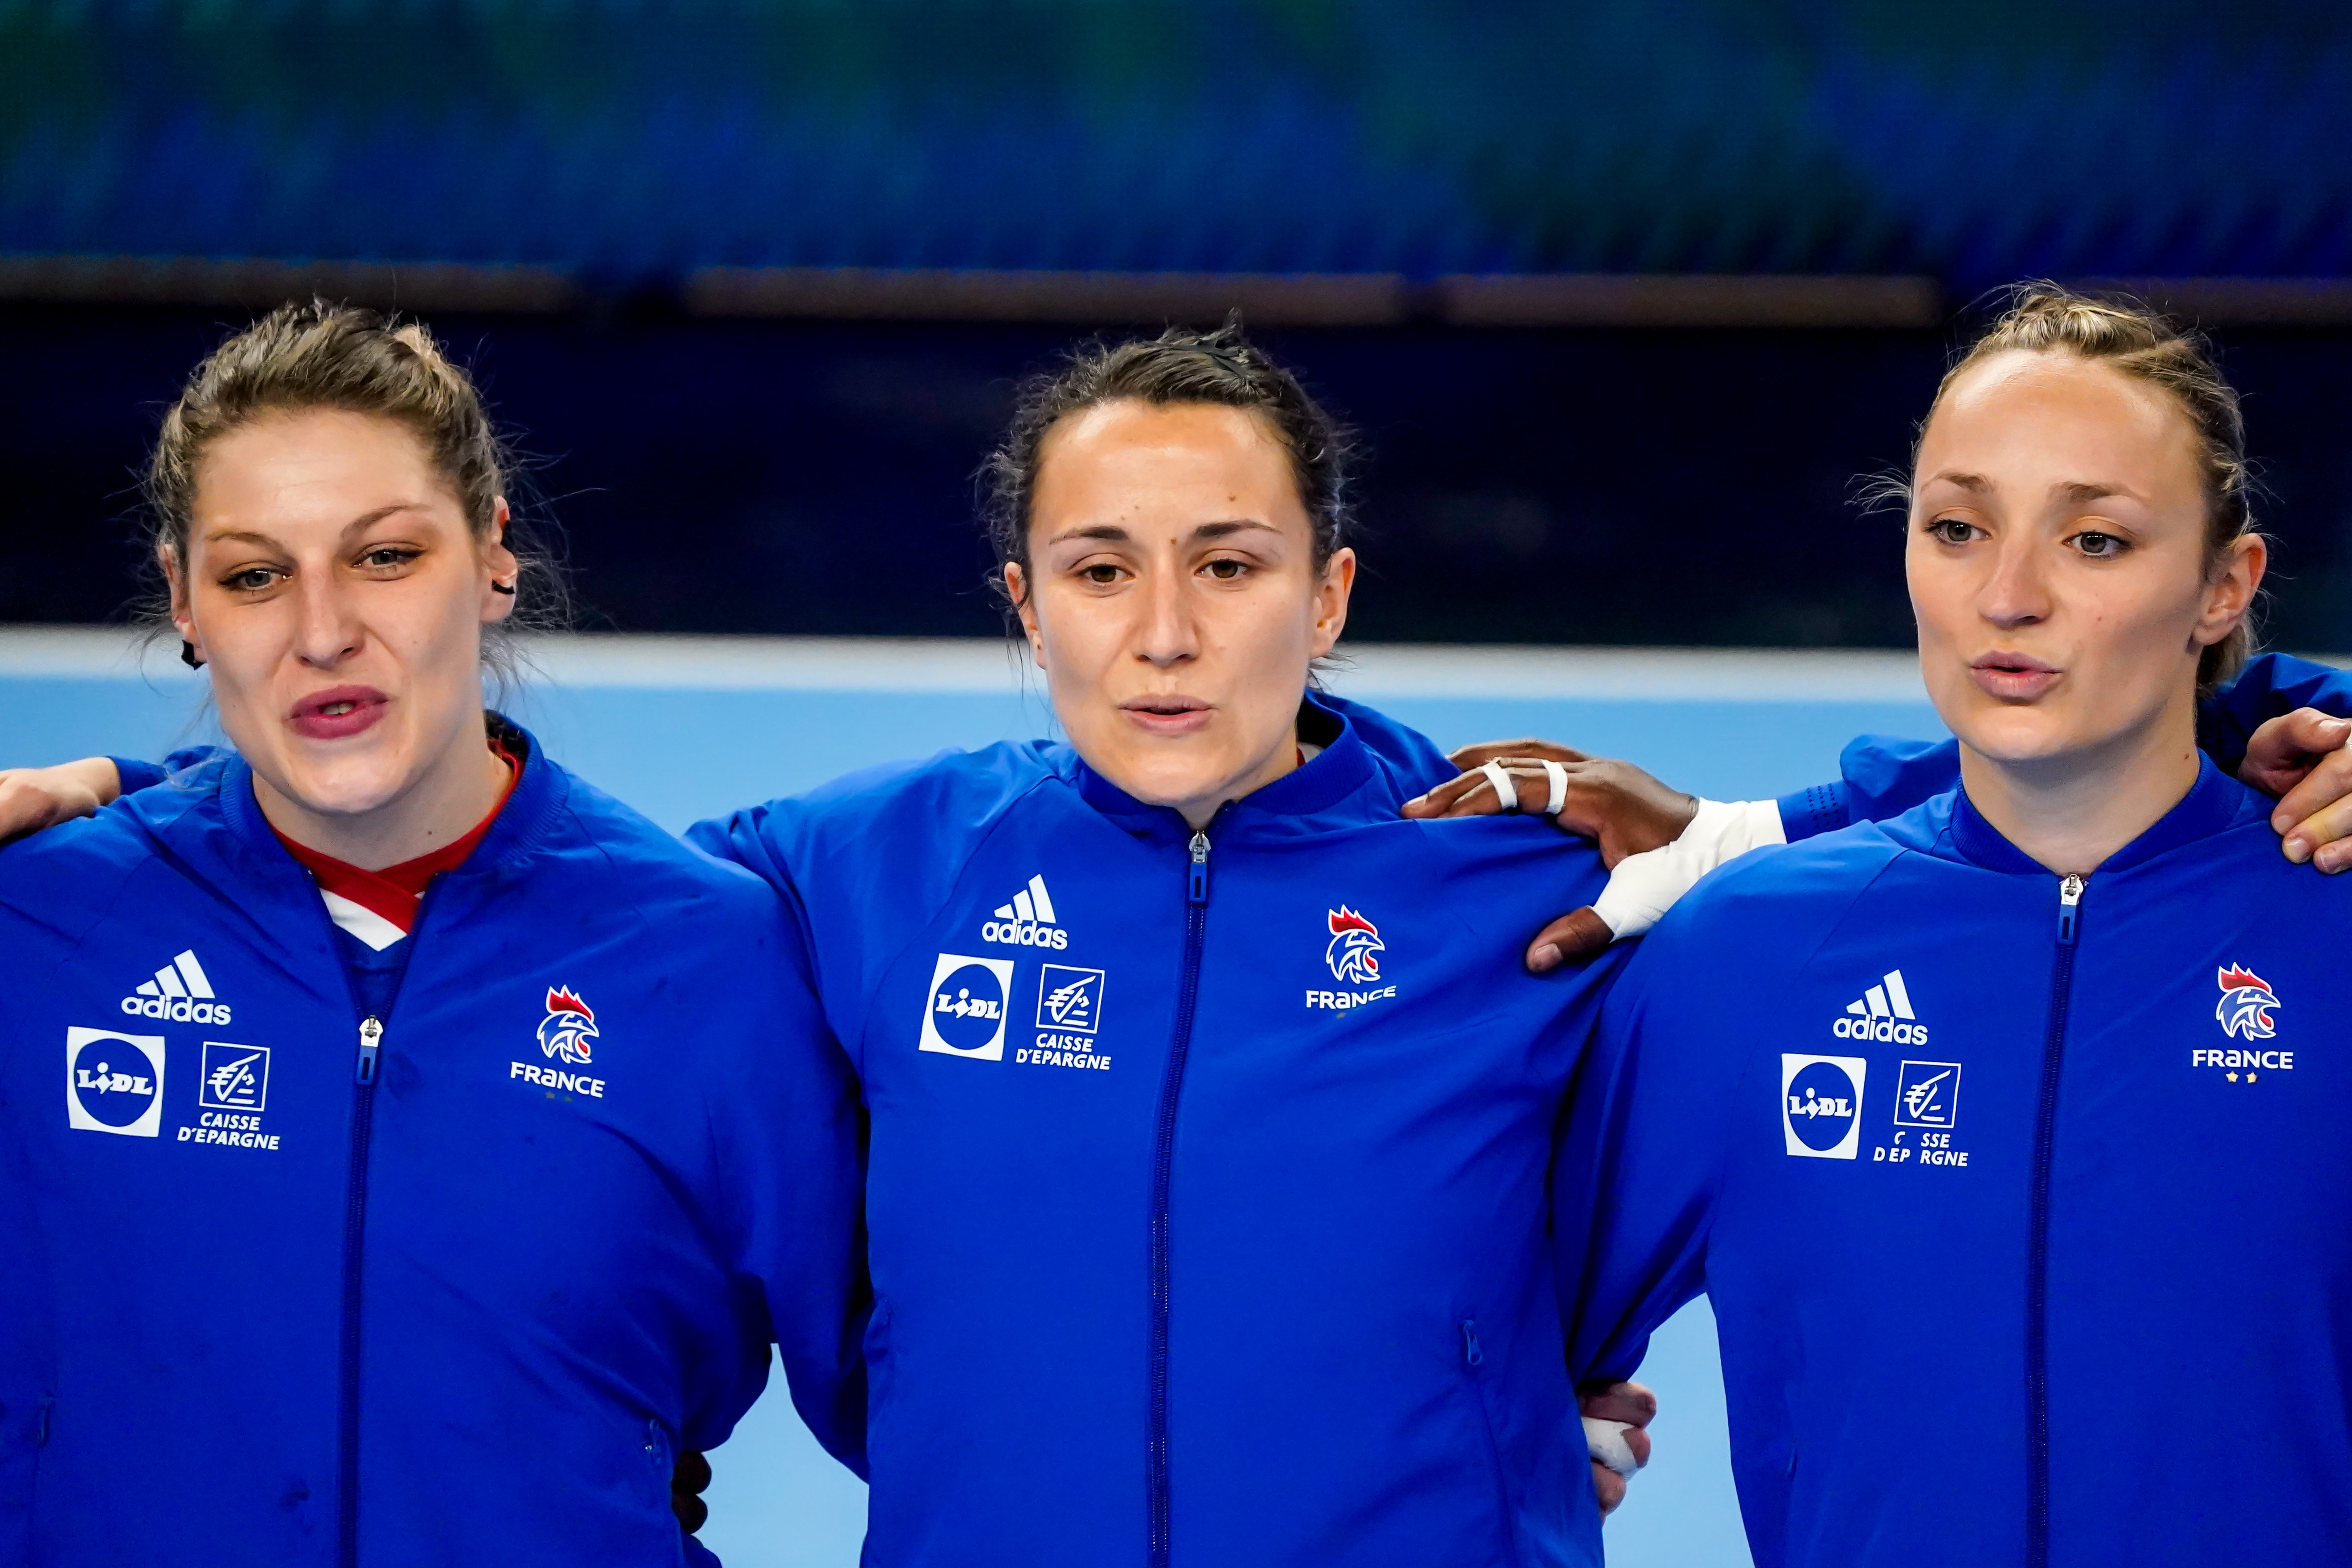 Chloe VALENTINI of France, Pauline COATANEA of France and Alicia TOUBLANC of France during the Women's EHF Euro 2022 Qualifying between Czech Republic and France on April 20, 2022 in Plzen, Czech Republic. (Photo by Hugo Pfeiffer/Icon Sport)